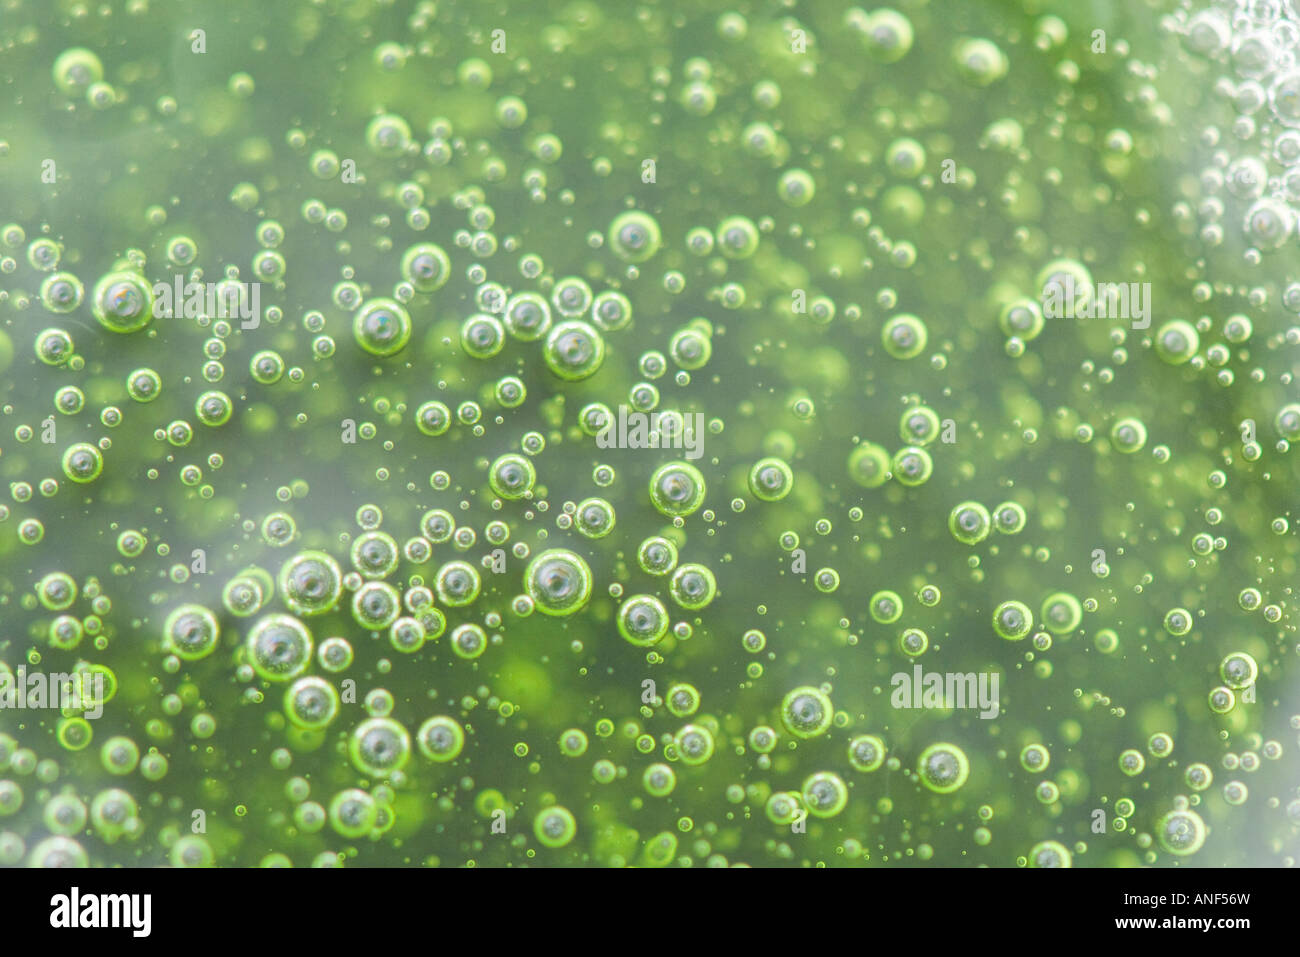 Bubbles in green substance, full frame Stock Photo